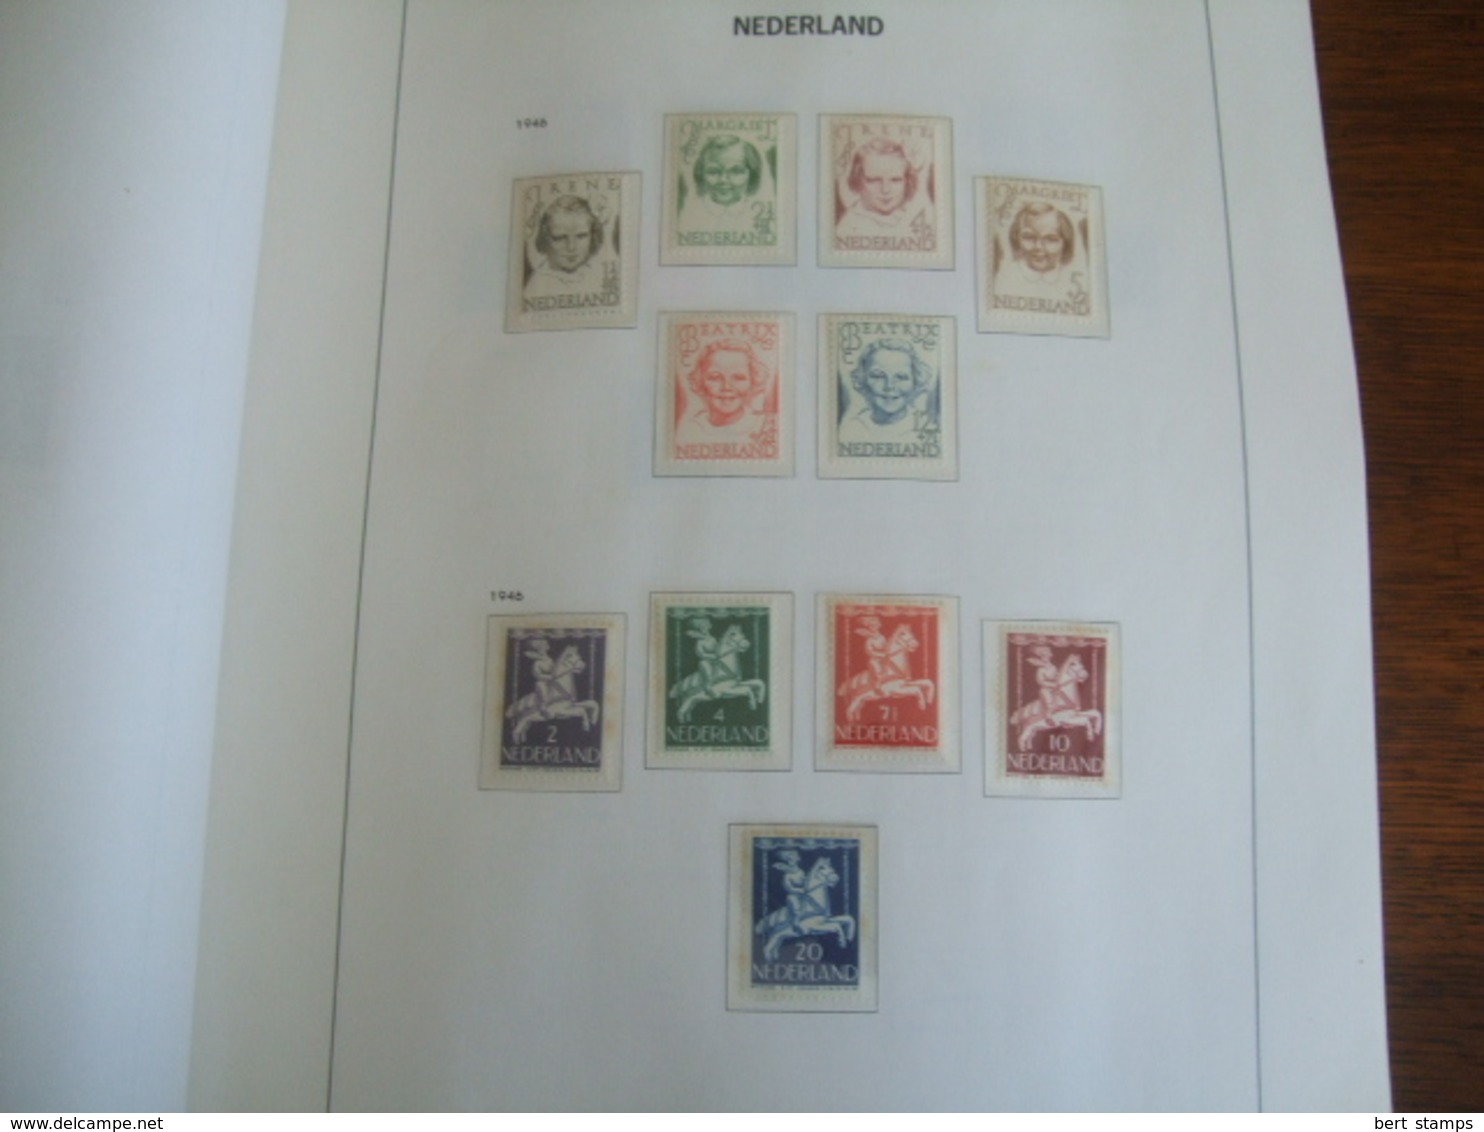 Mooie Collectie Nederland, Nice Collection Netherlands, MNH And Hinged From 1944 - 1989 - Verzamelingen